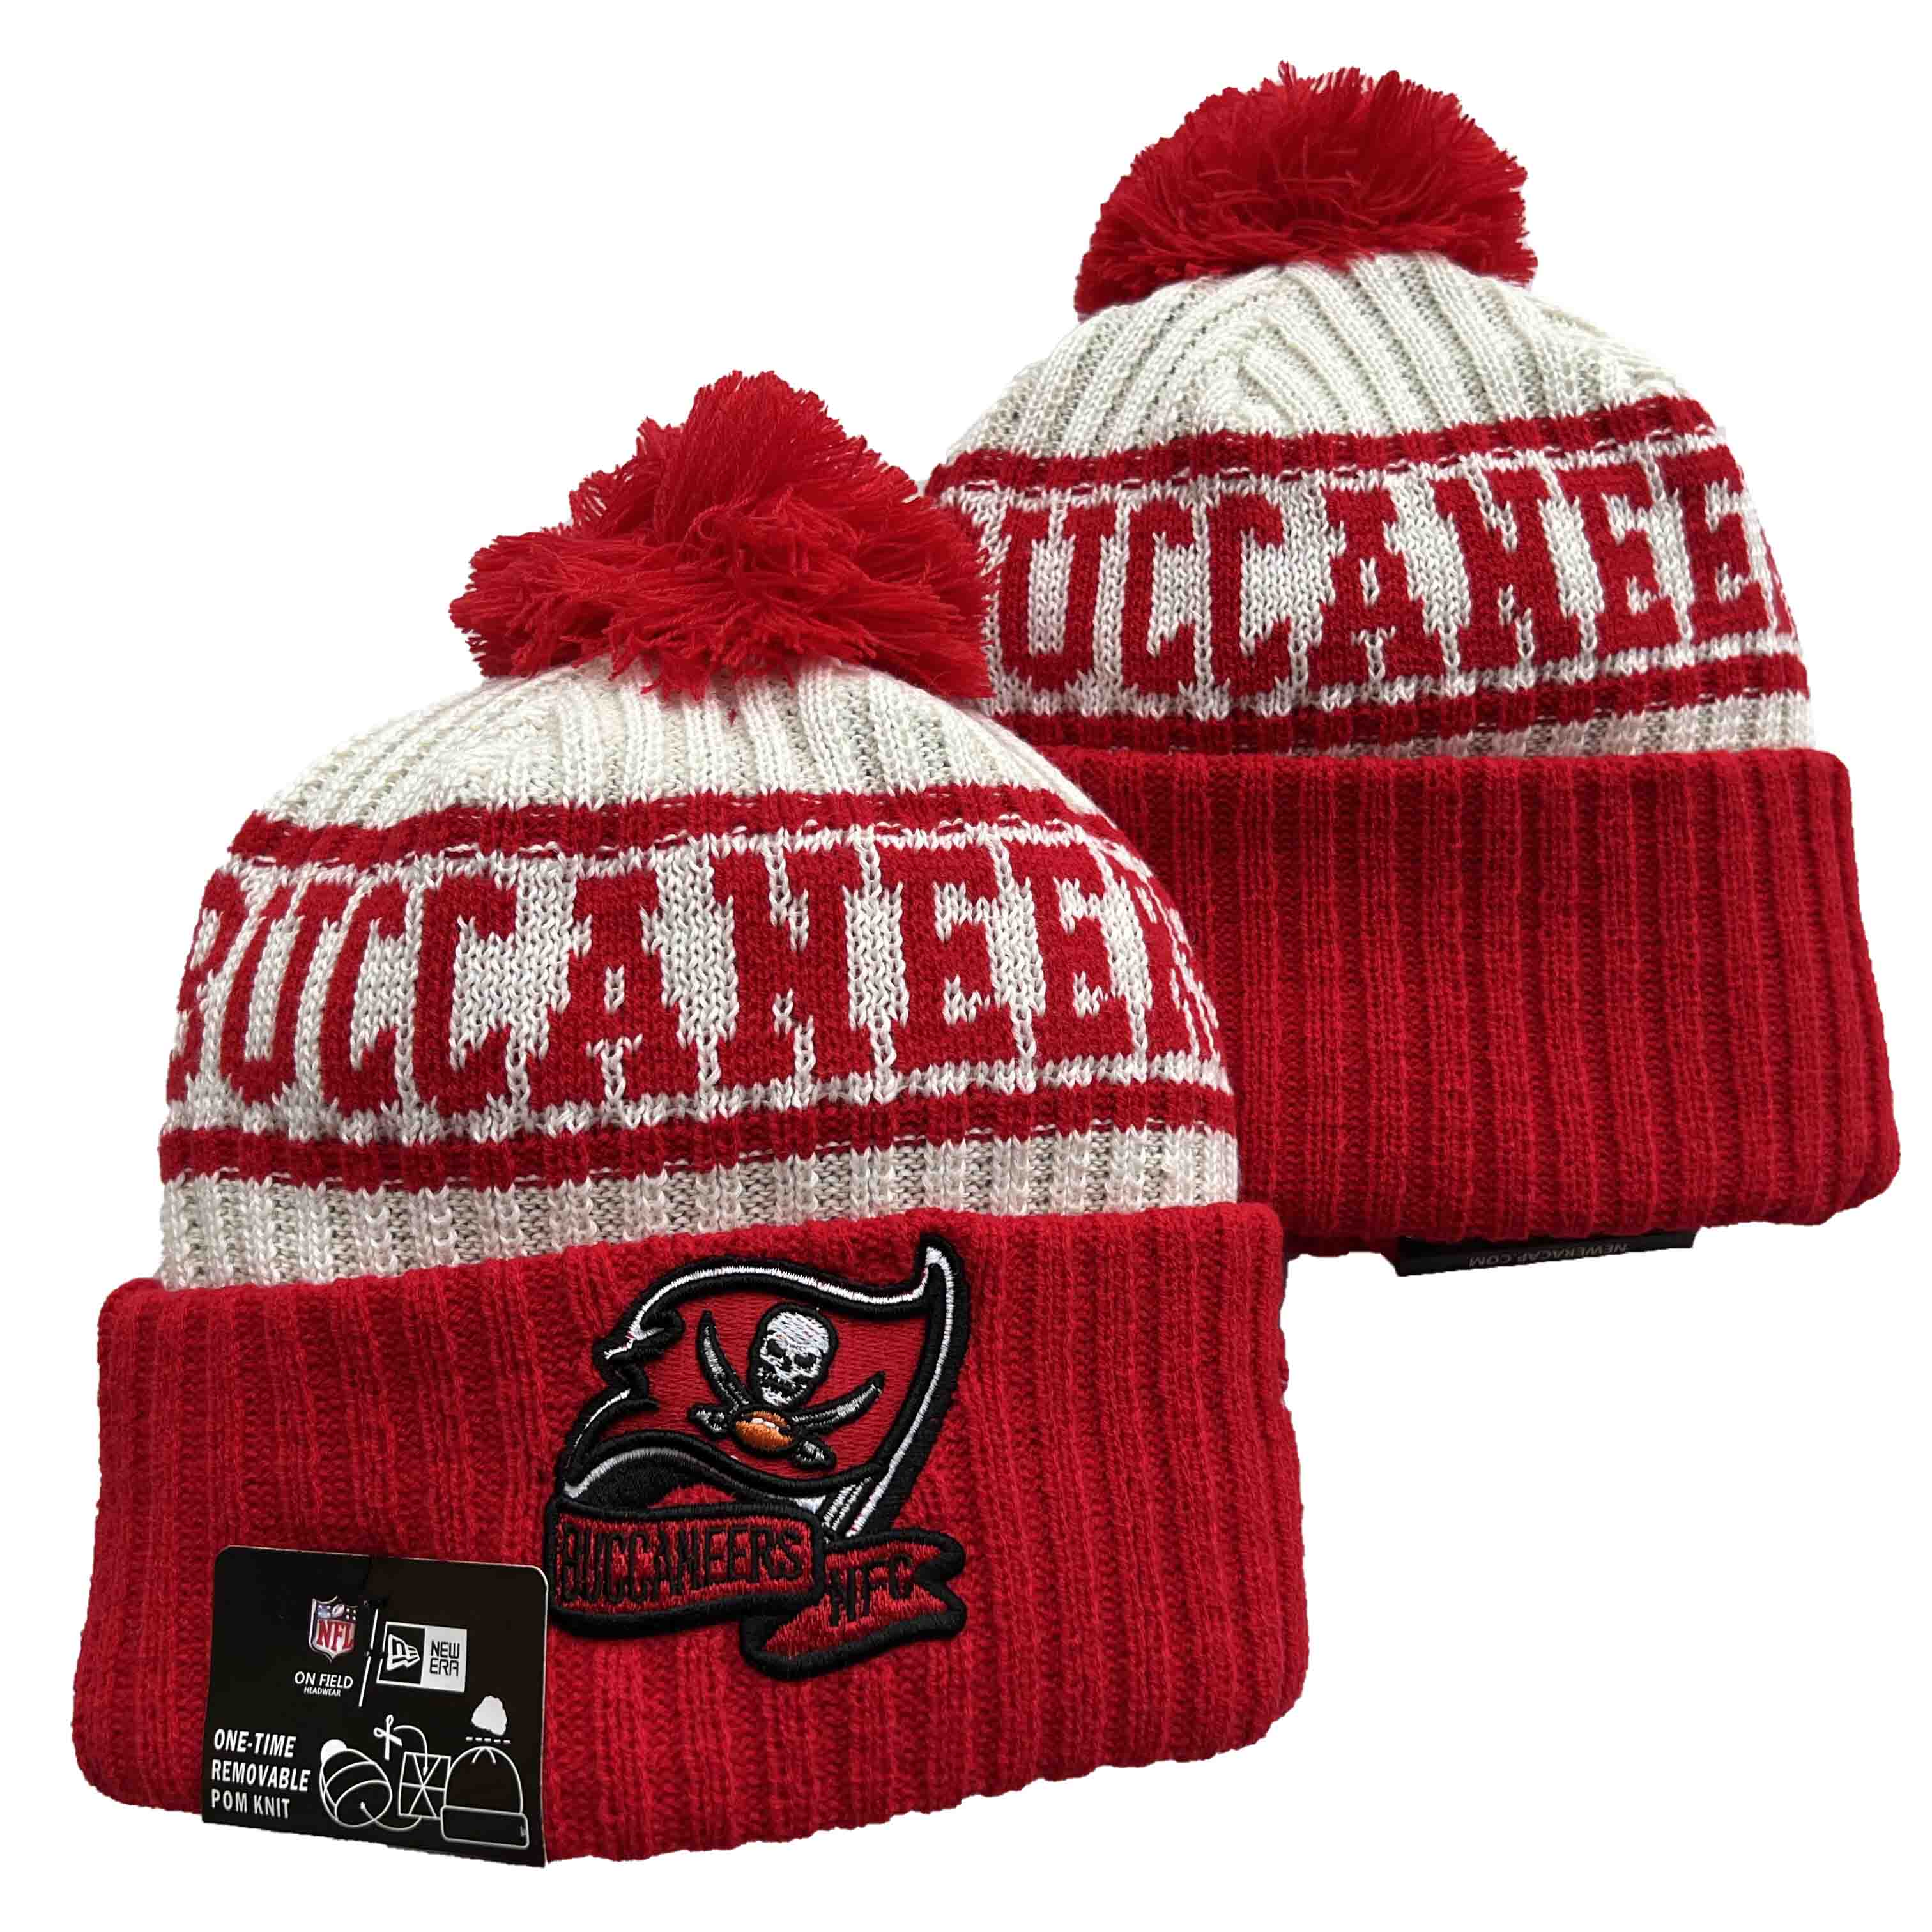 Tampa Bay Buccaneers Knit Hats -9